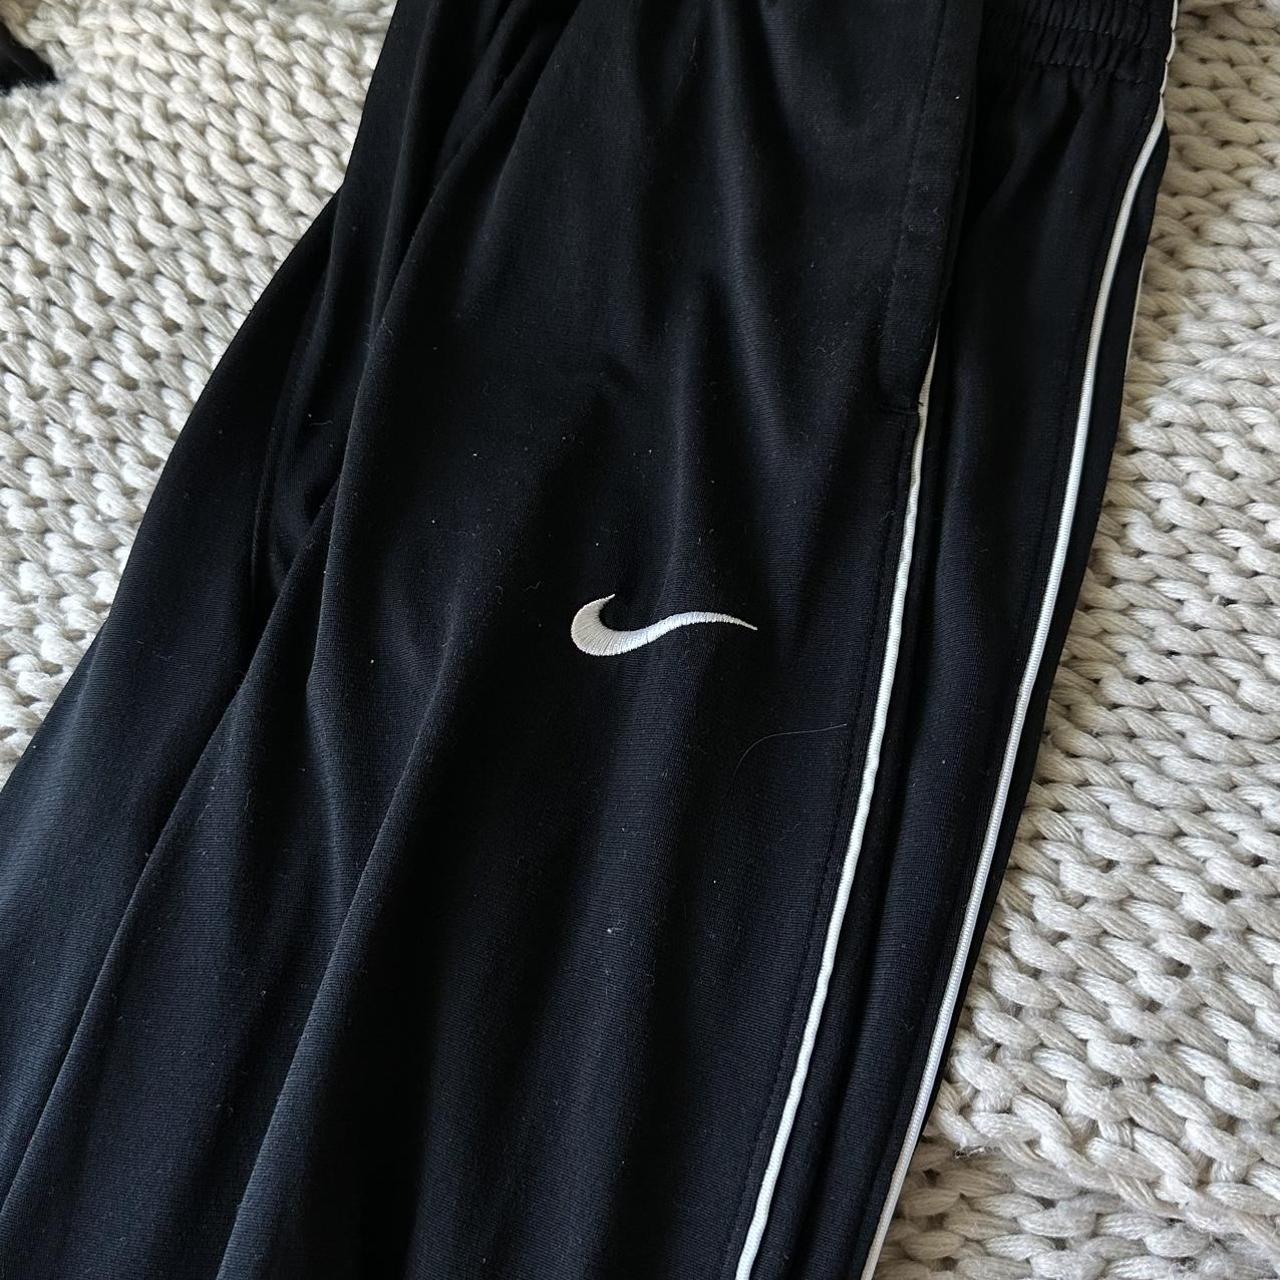 Nike Women's Black and White Trousers